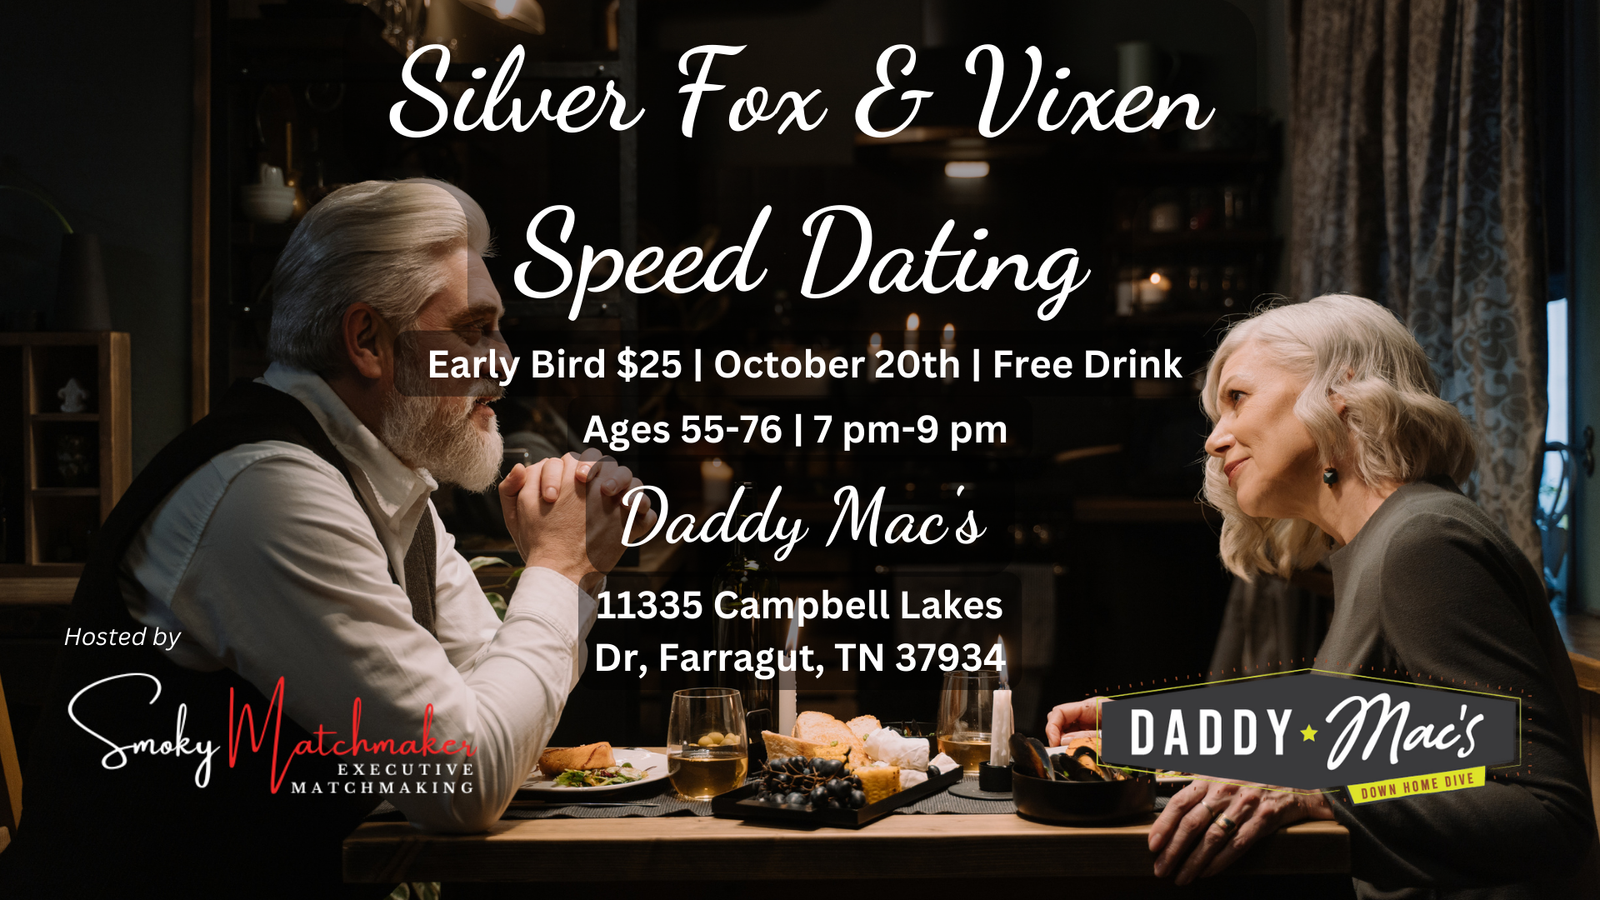 Silver Fox And Vixen Speed Dating Party